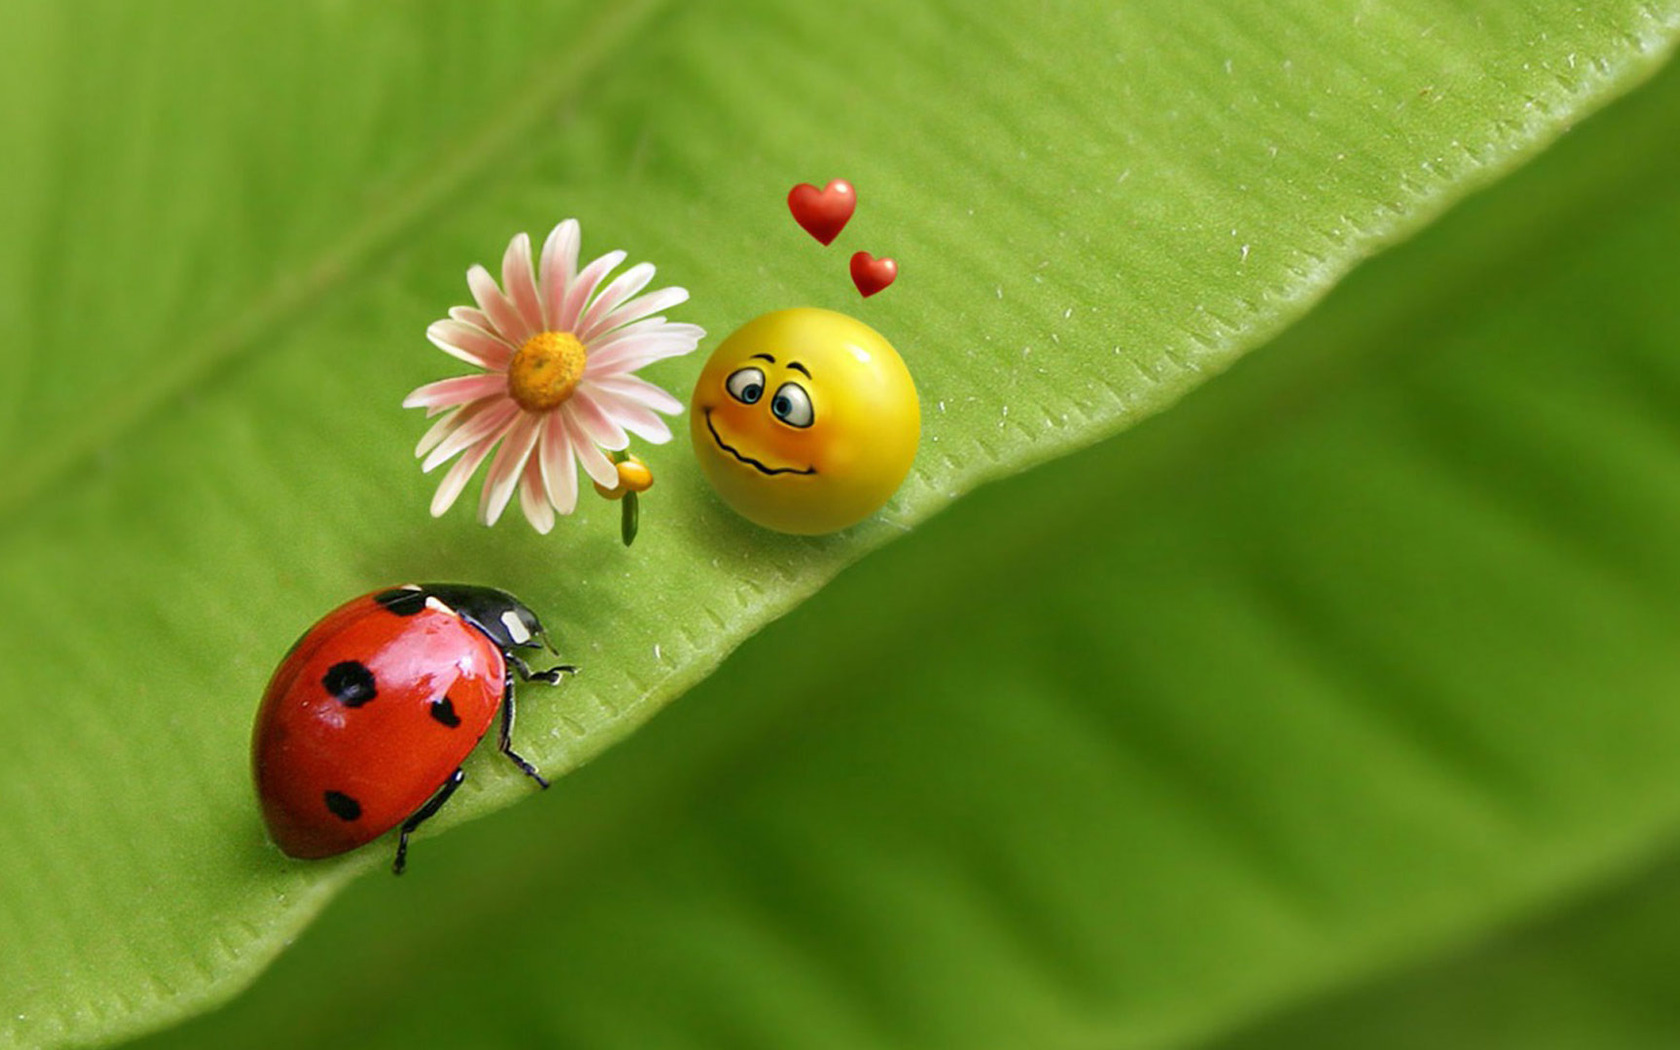 Ladybug And Smiley Face In Love Wallpaper